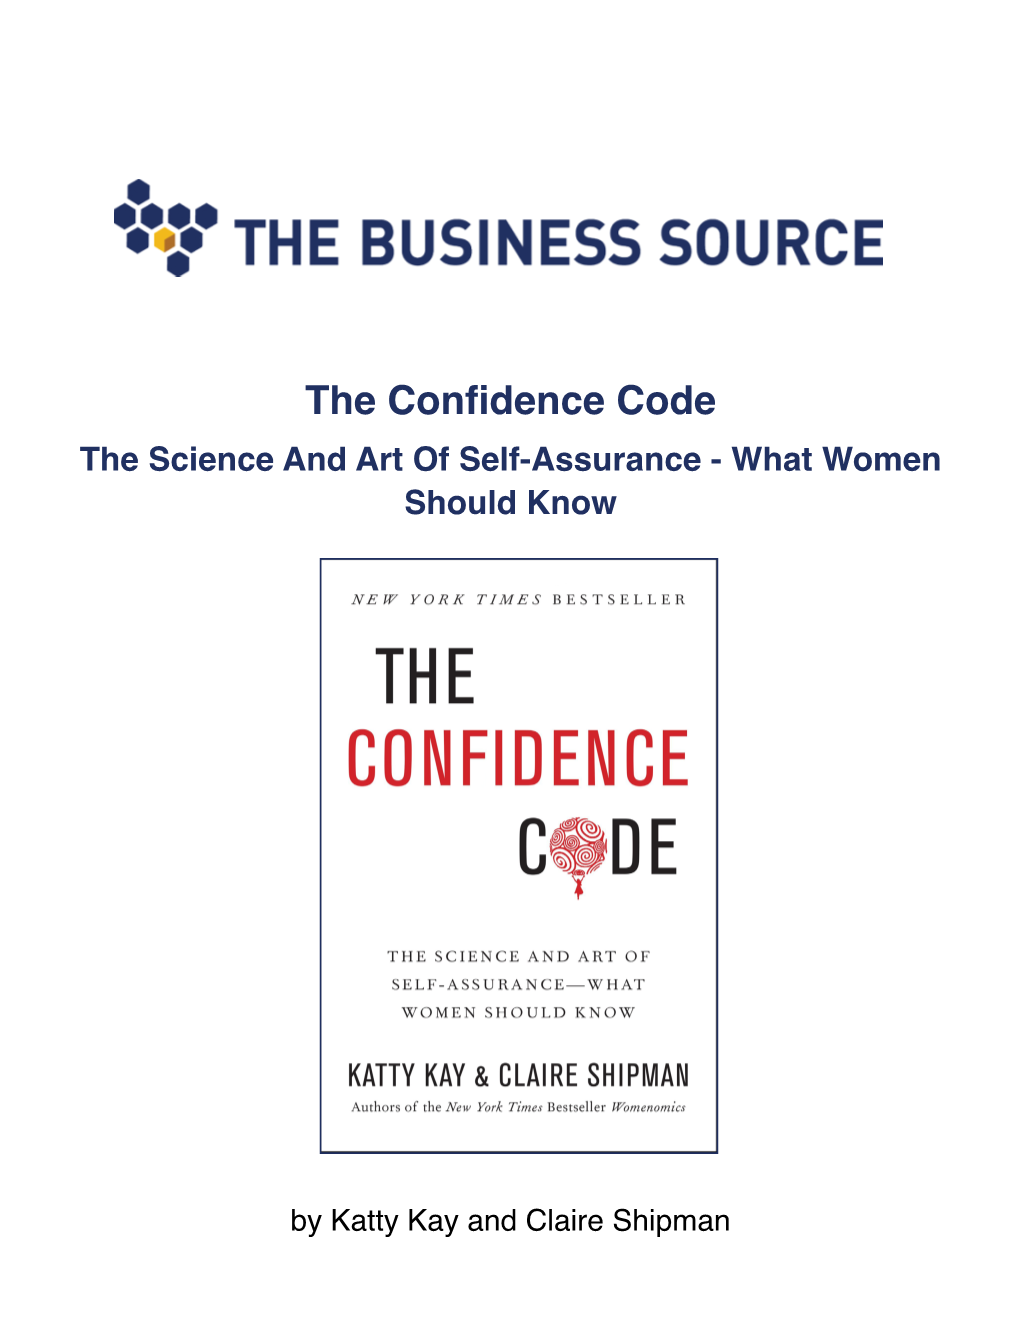 The Confidence Code the Science and Art of Self-Assurance - What Women Should Know